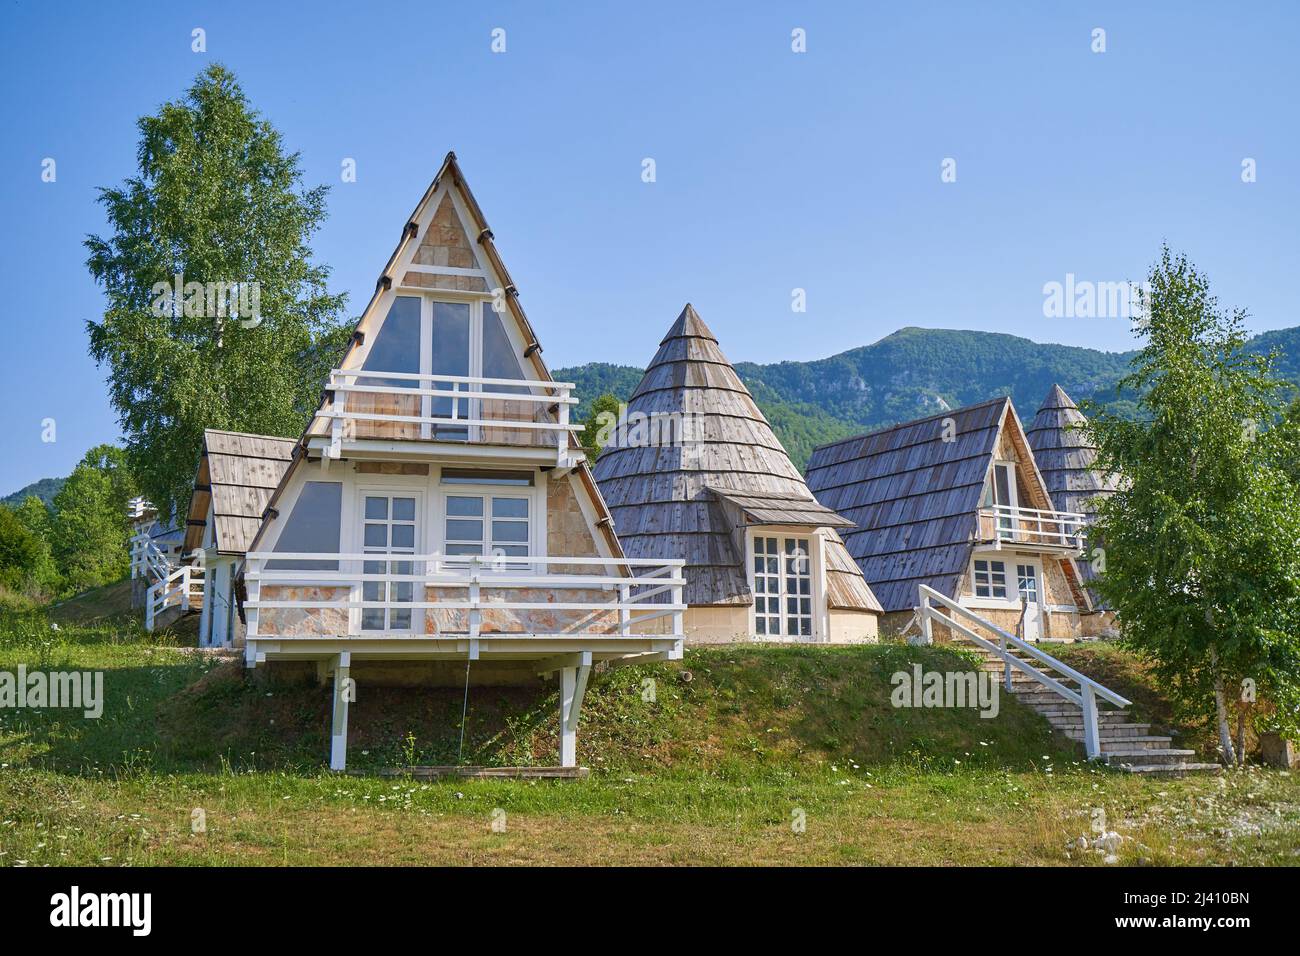 Lovely peaked roof bungalow houses for hikers in the mountains Stock Photo